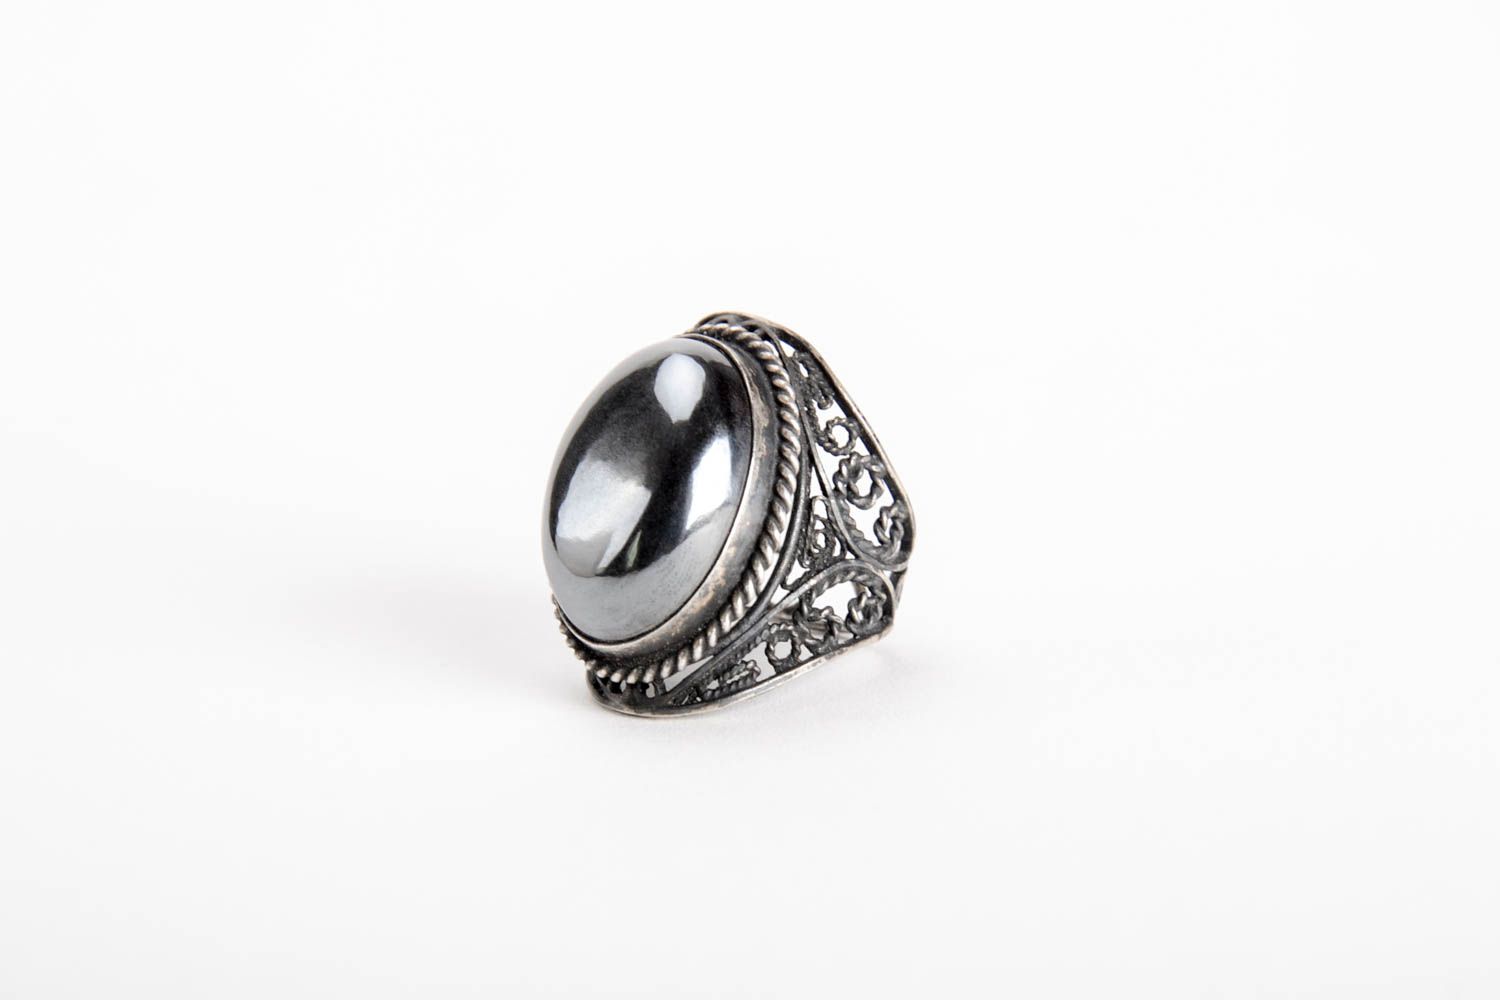 Handmade silver ring designer silver jewelry unusual ring with stone gift ideas photo 5